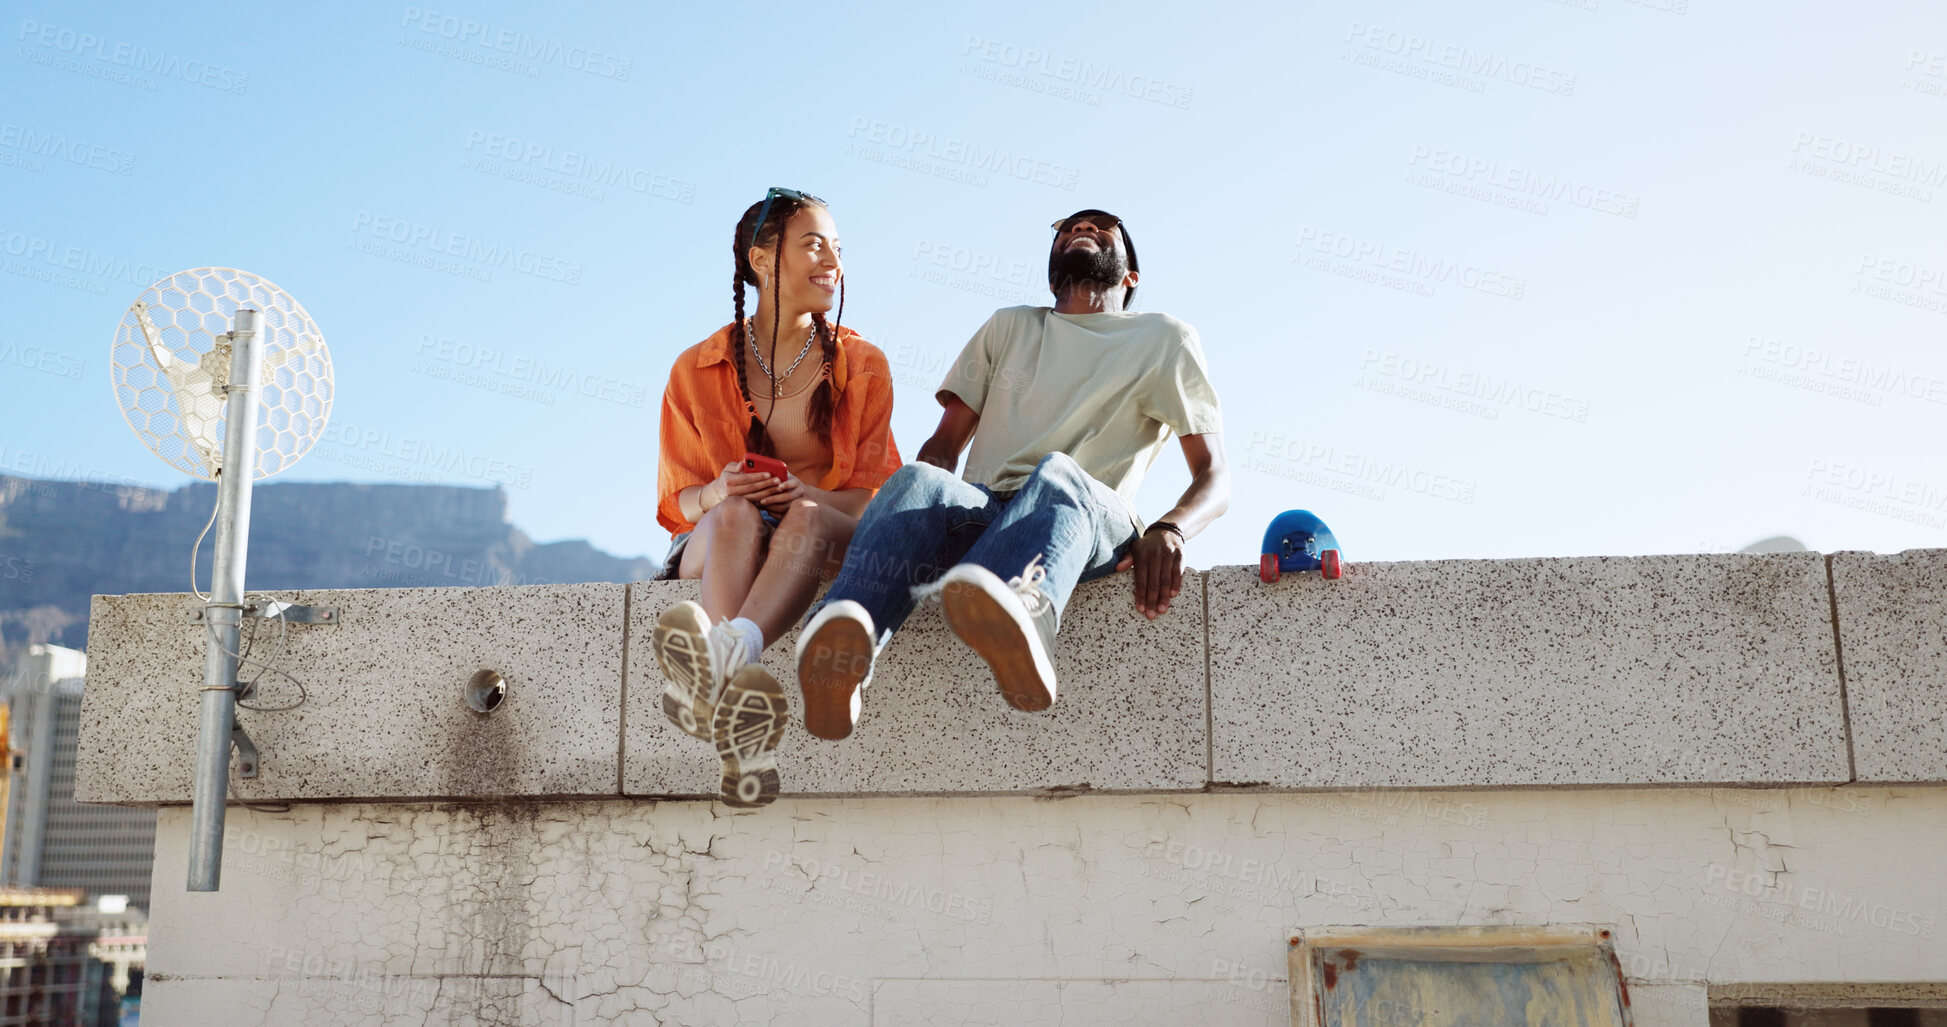 Buy stock photo Couple of friends, roof and laughing on city building, fun and youth in happy social bonding on summer sky. Joke, gen z man and woman on rooftop with smile, comedy and relax on urban date together.